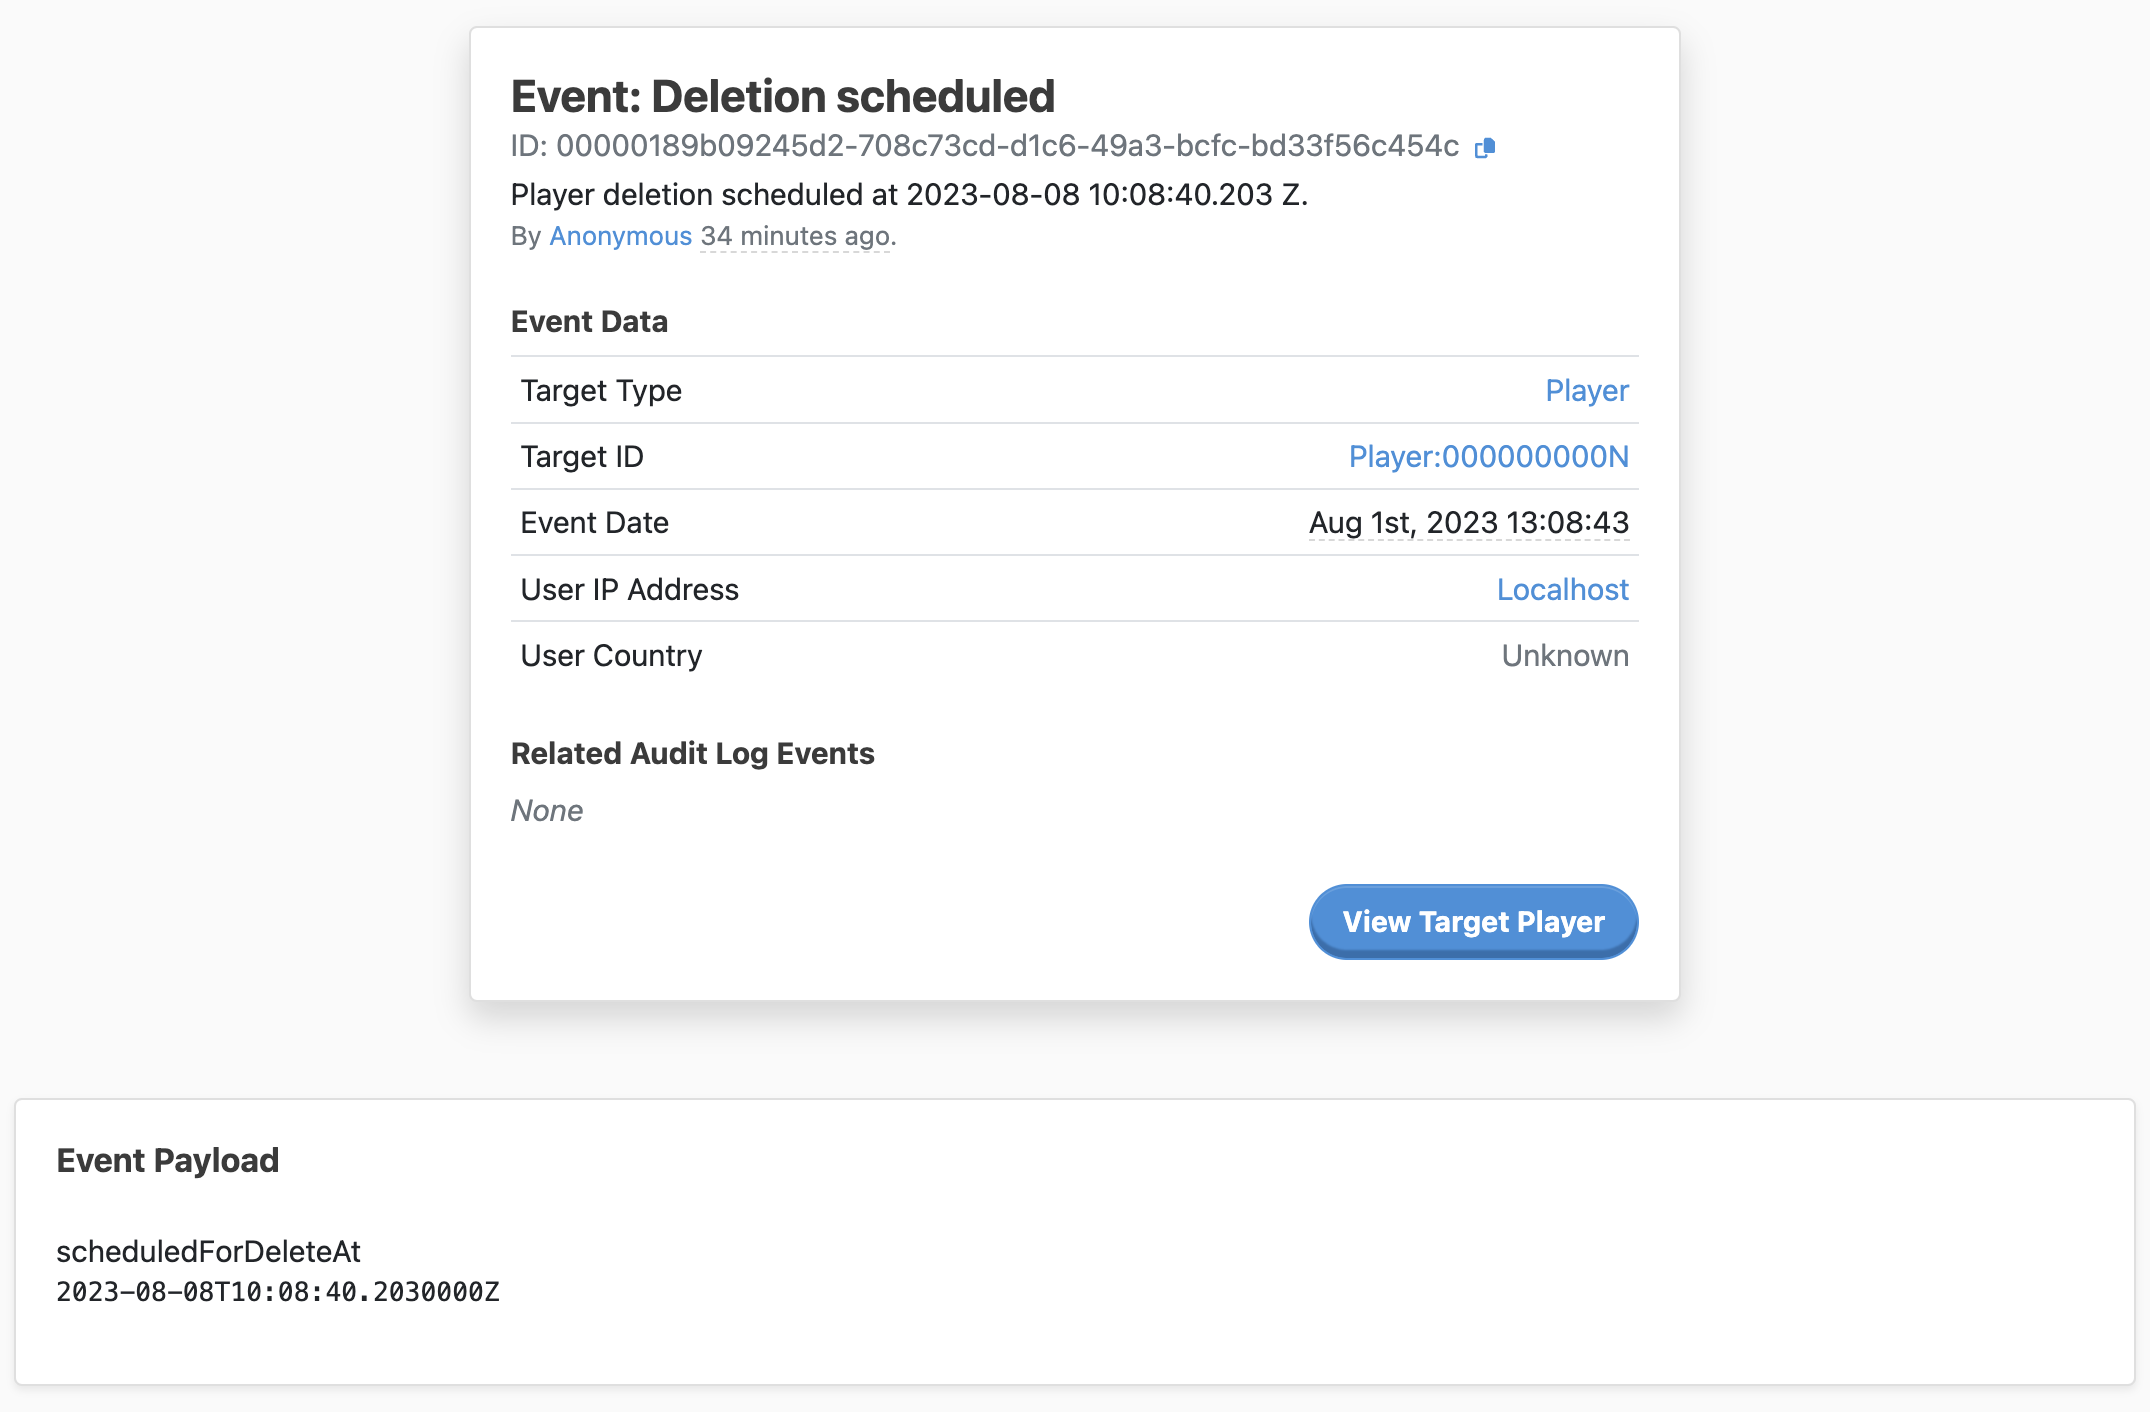 You can use the links to quickly navigate to and from audit log events.